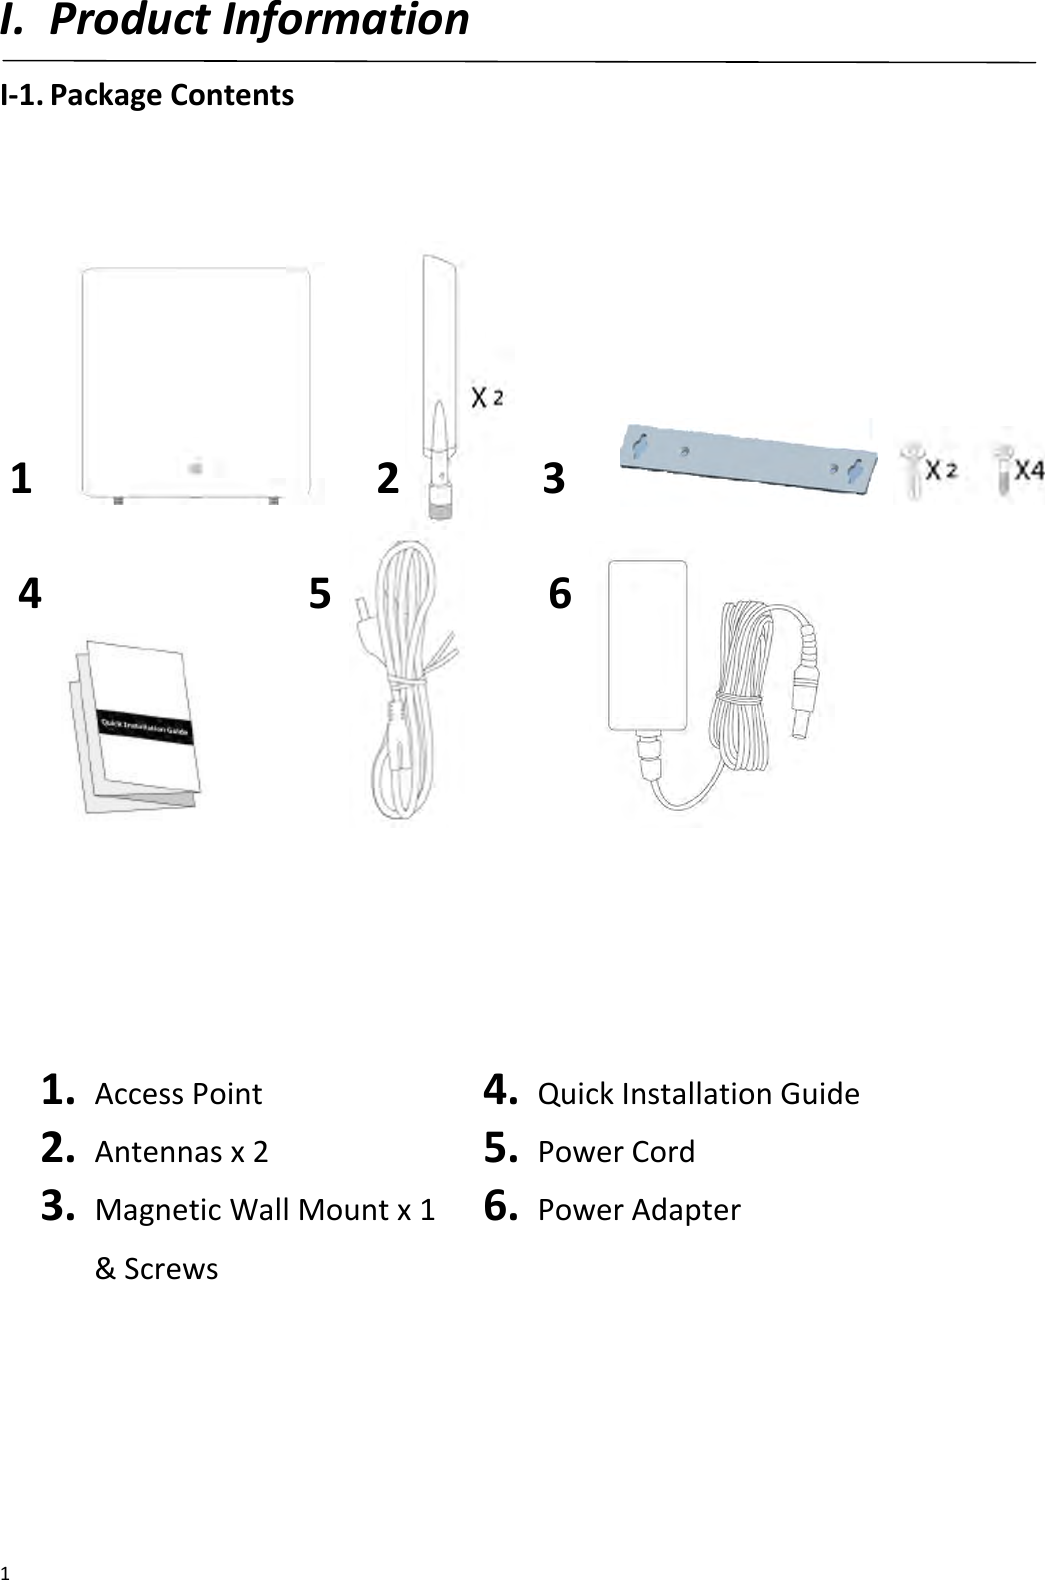  1 I. Product Information I-1. Package Contents                                                  1.   Access Point 2.   Antennas x 2 3.   Magnetic Wall Mount x 1 &amp; Screws  4.   Quick Installation Guide 5.   Power Cord 6.   Power Adapter    1 2 3 4 5 6 1 